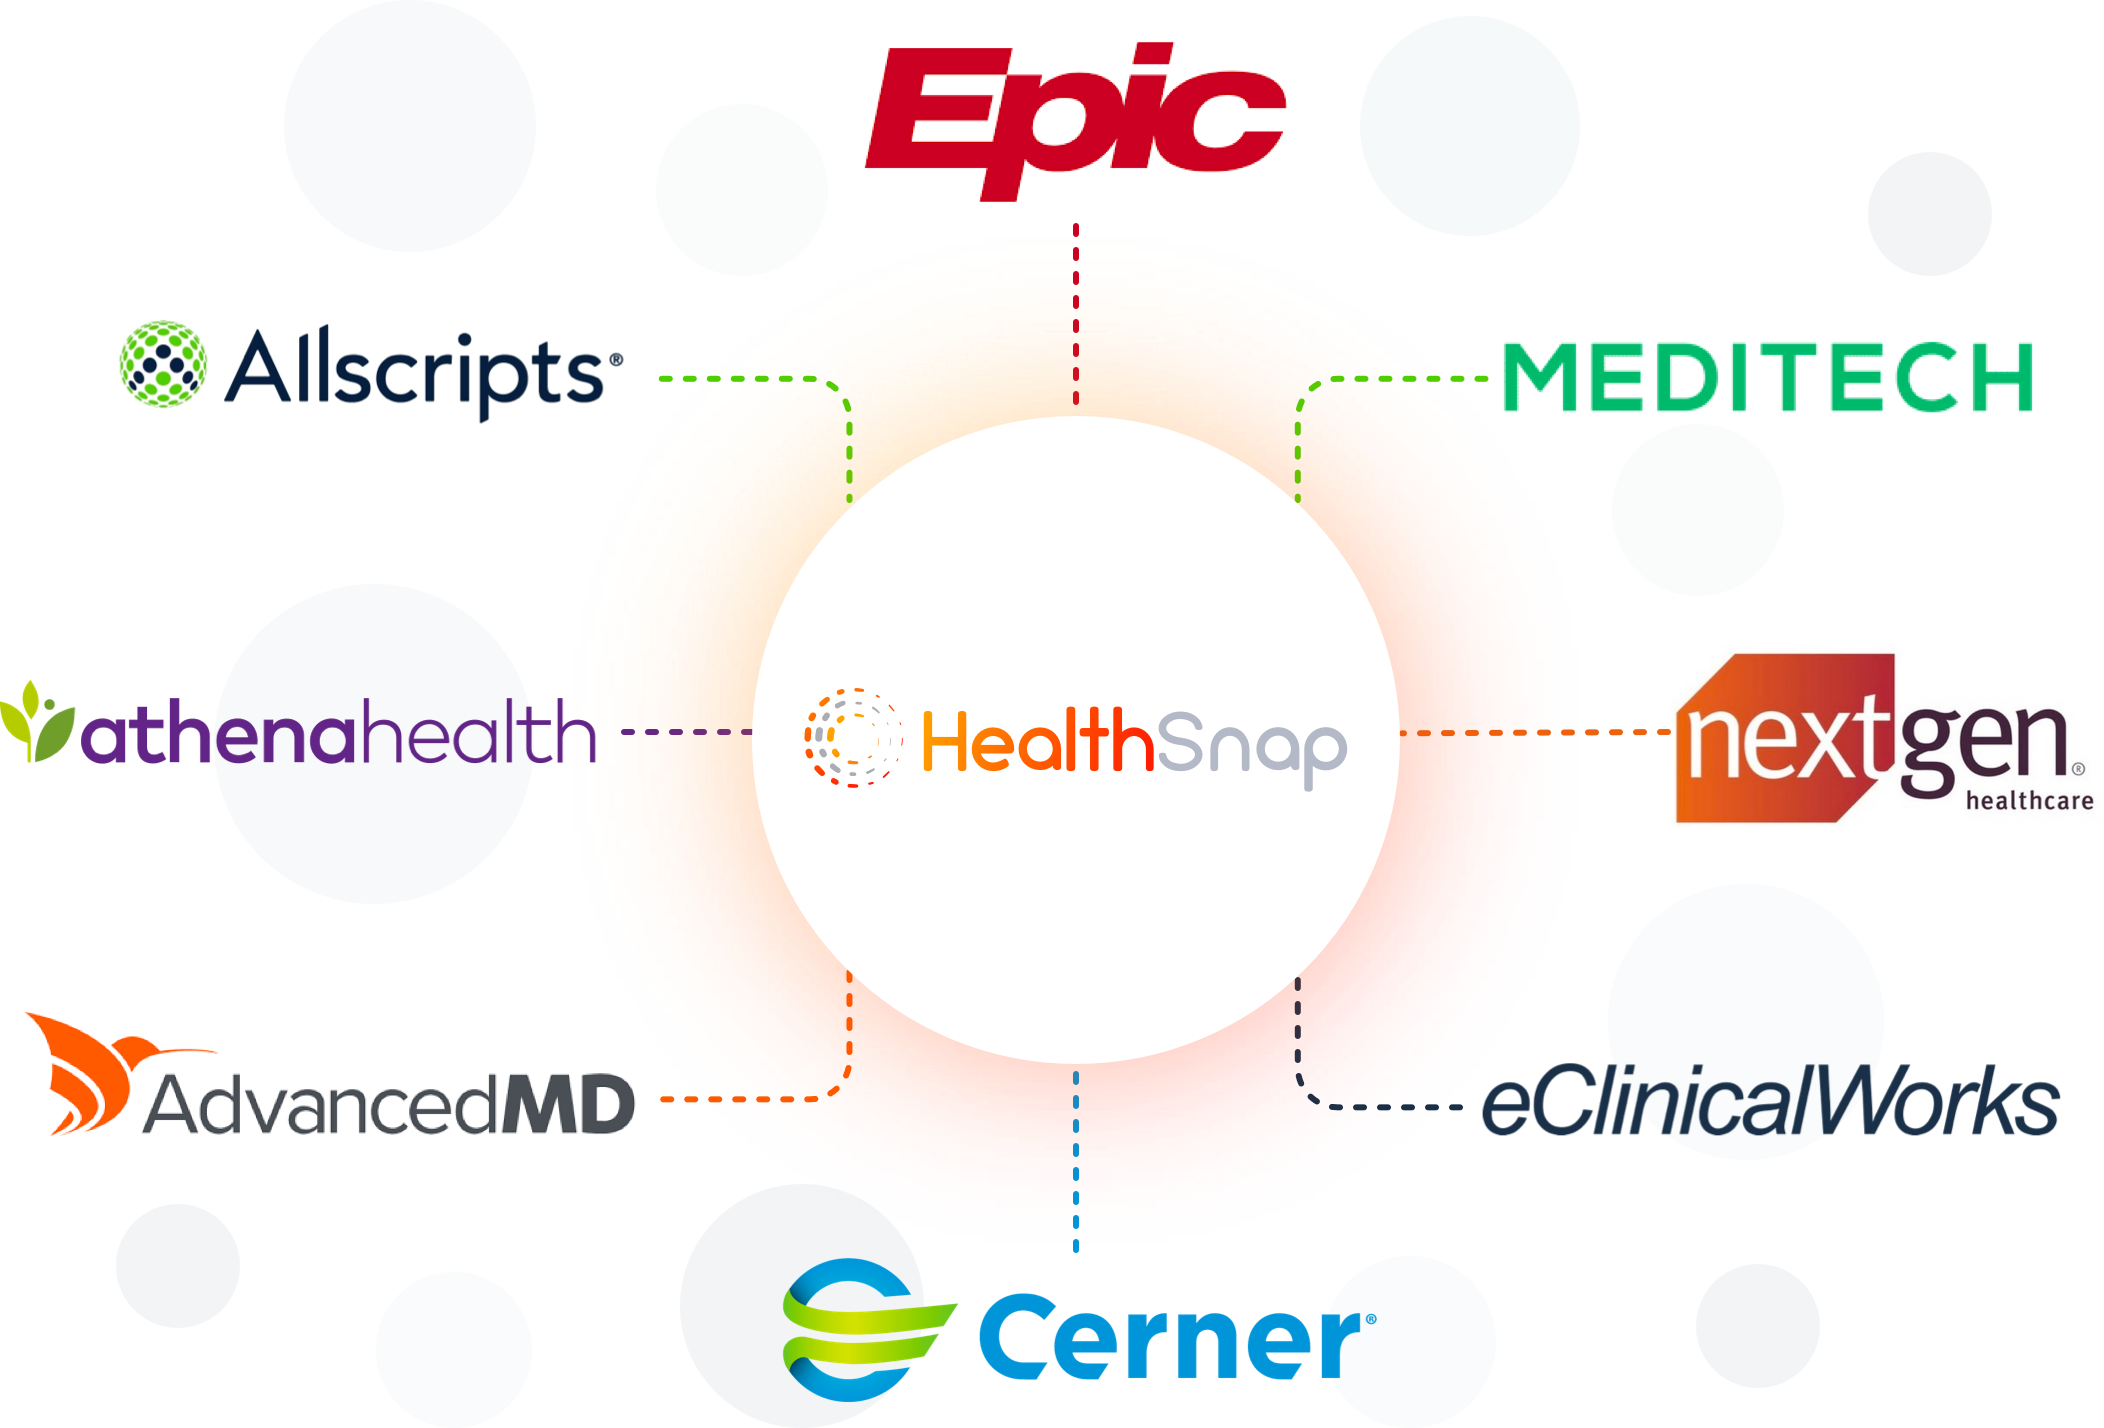 Population Data, chronic health conditions, interoperable systems, clinical data, patient generated data, healthcare professionals